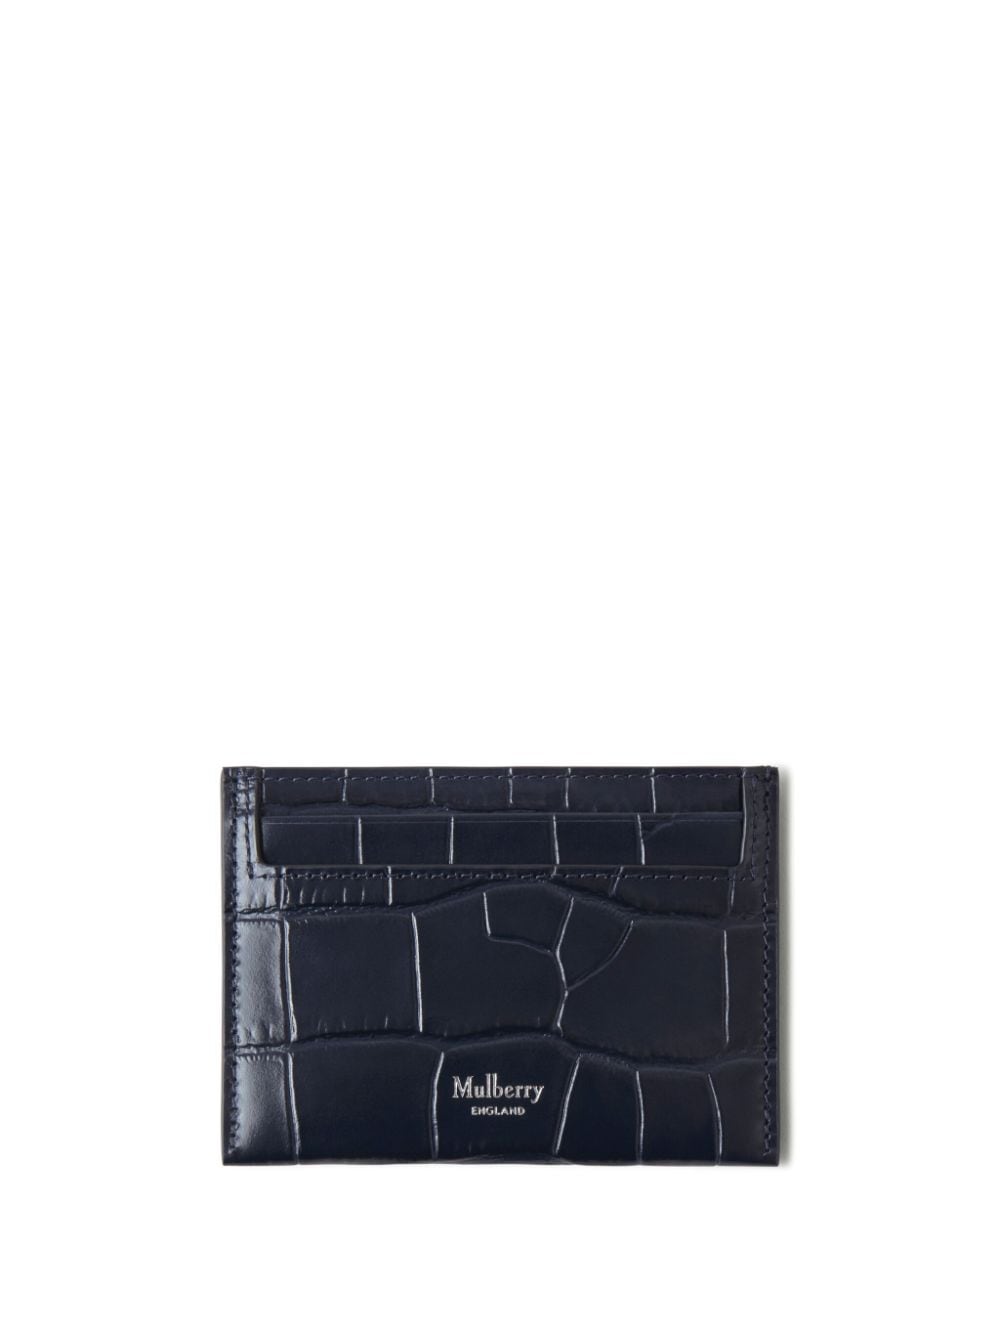 Mulberry crocodile-effect leather cardholder - Blue von Mulberry